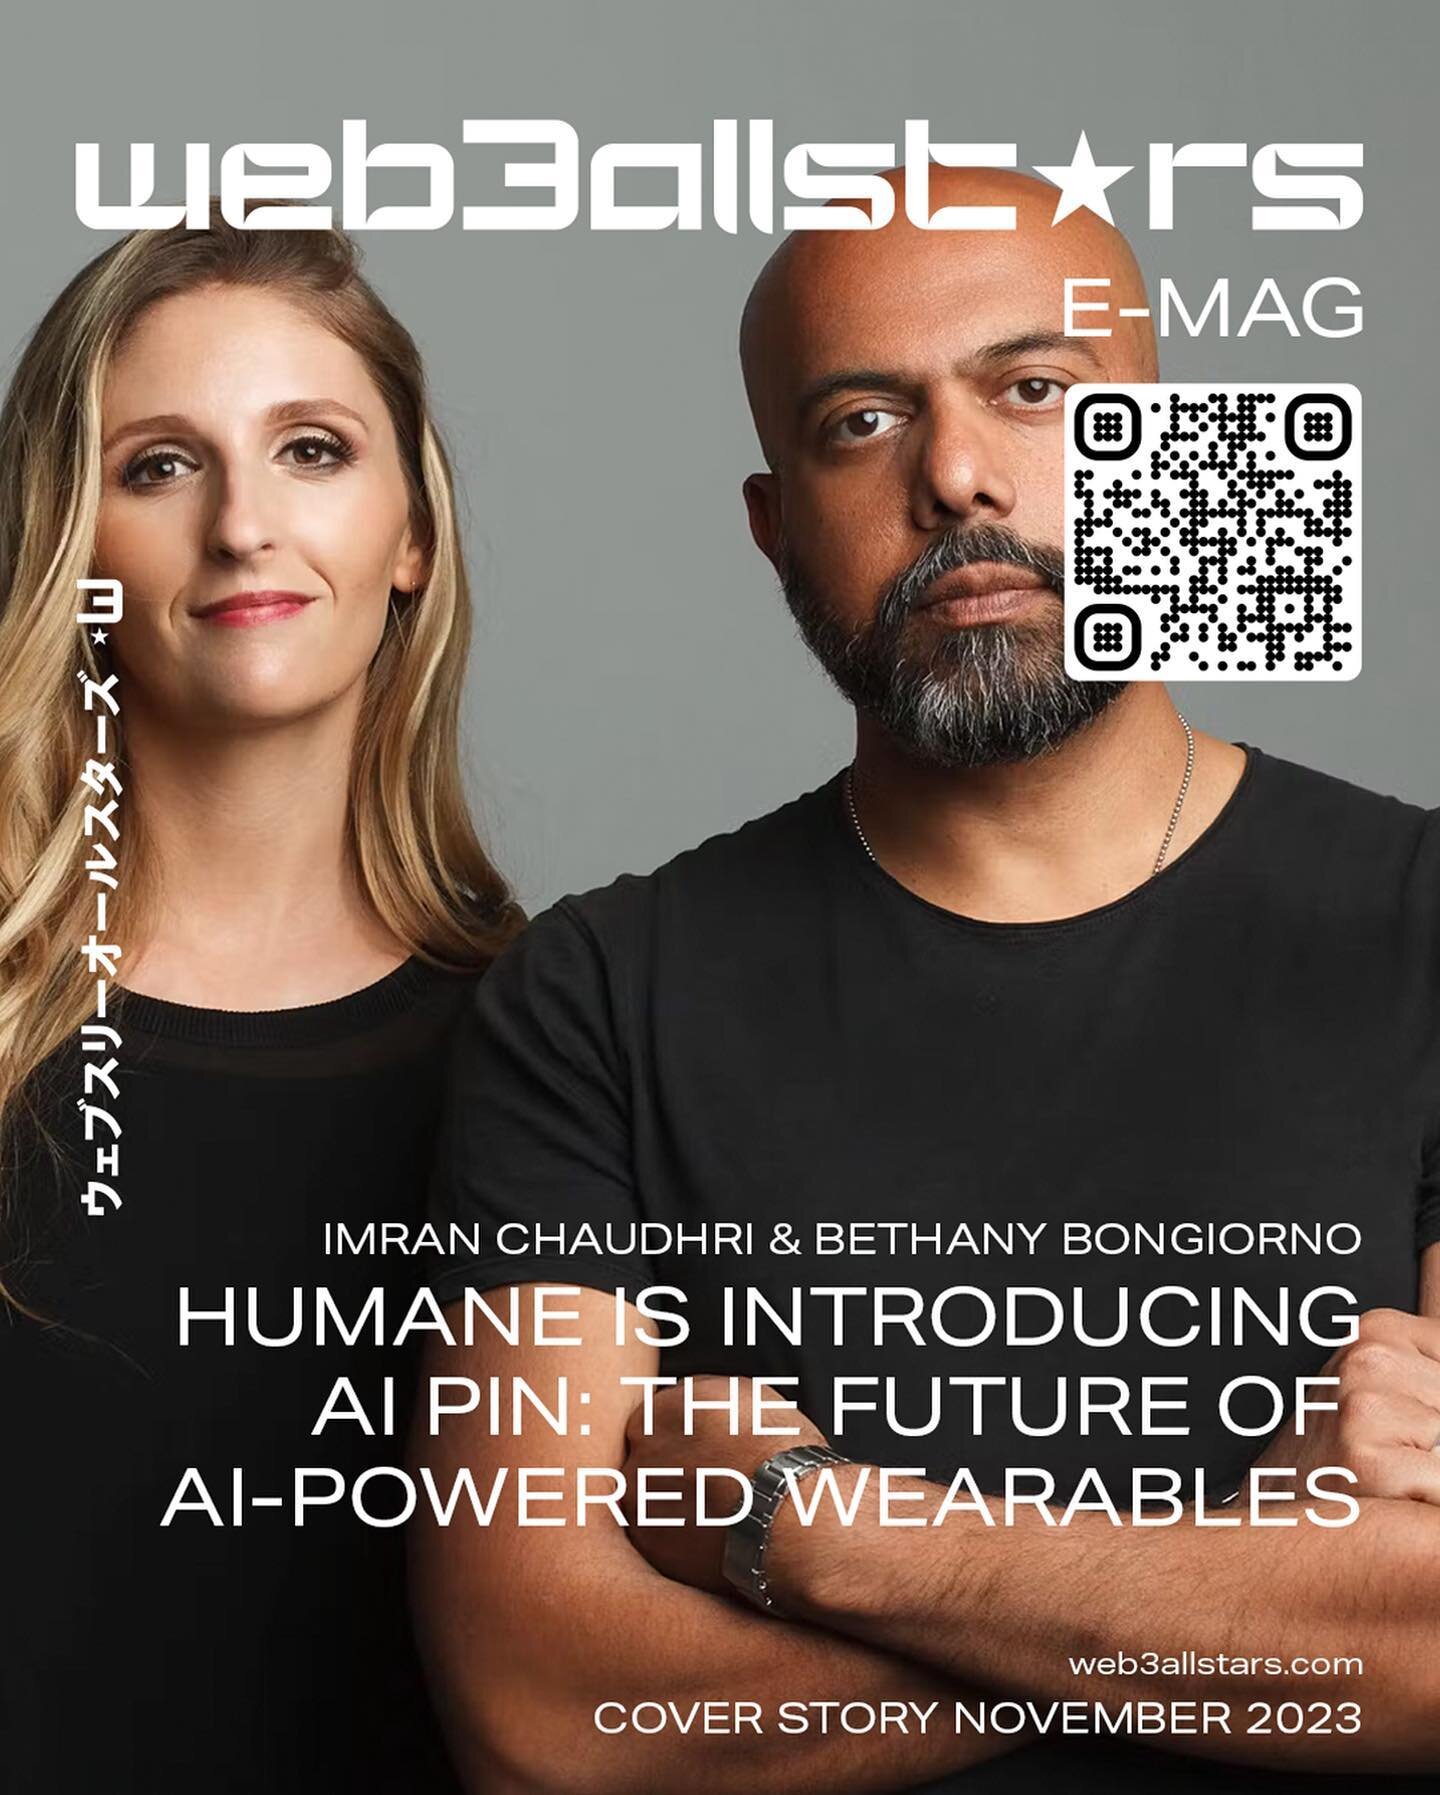 Humane, a startup company founded by the ex-Apple employees Imran Chaudhri @imranchaudhri and Bethany Bongiorno @bethanybongiorno, has introduced the AI Pin, a compact yet powerful device designed to integrate artificial intelligence seamlessly into 